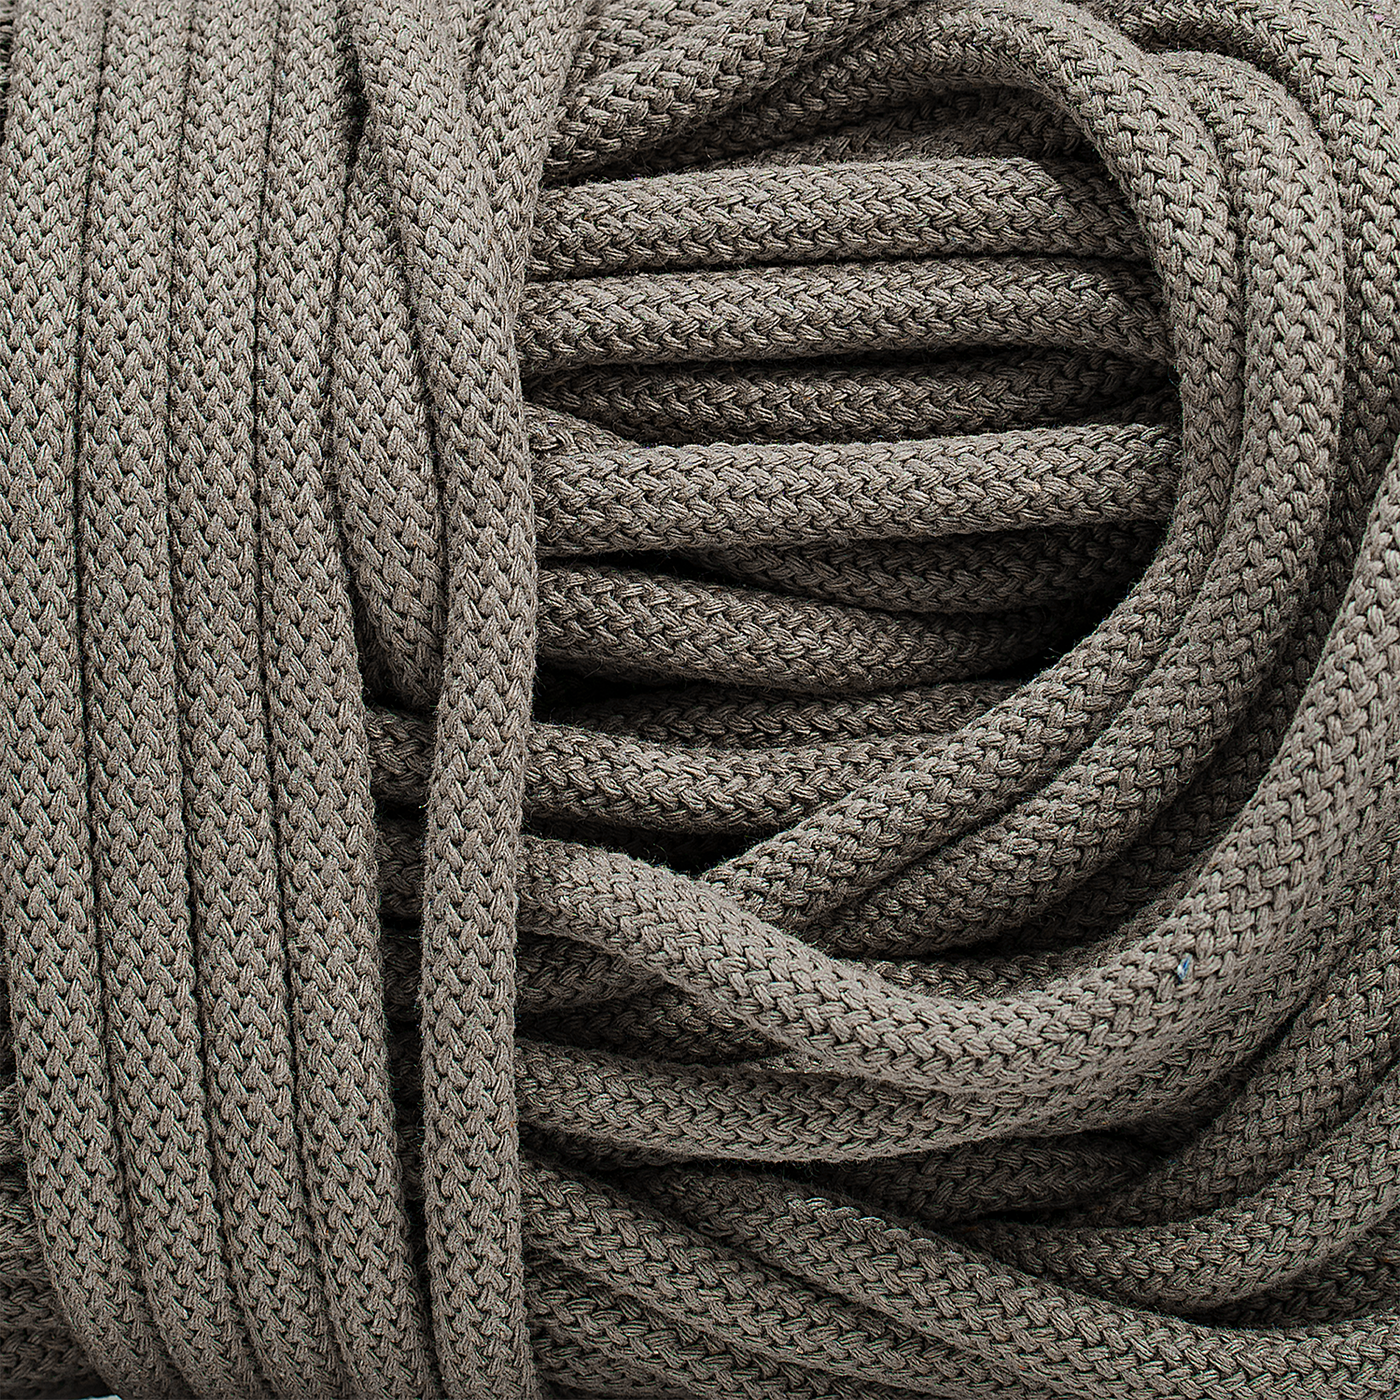 Braided Recycled Cotton Cord 9mm - Chestnut